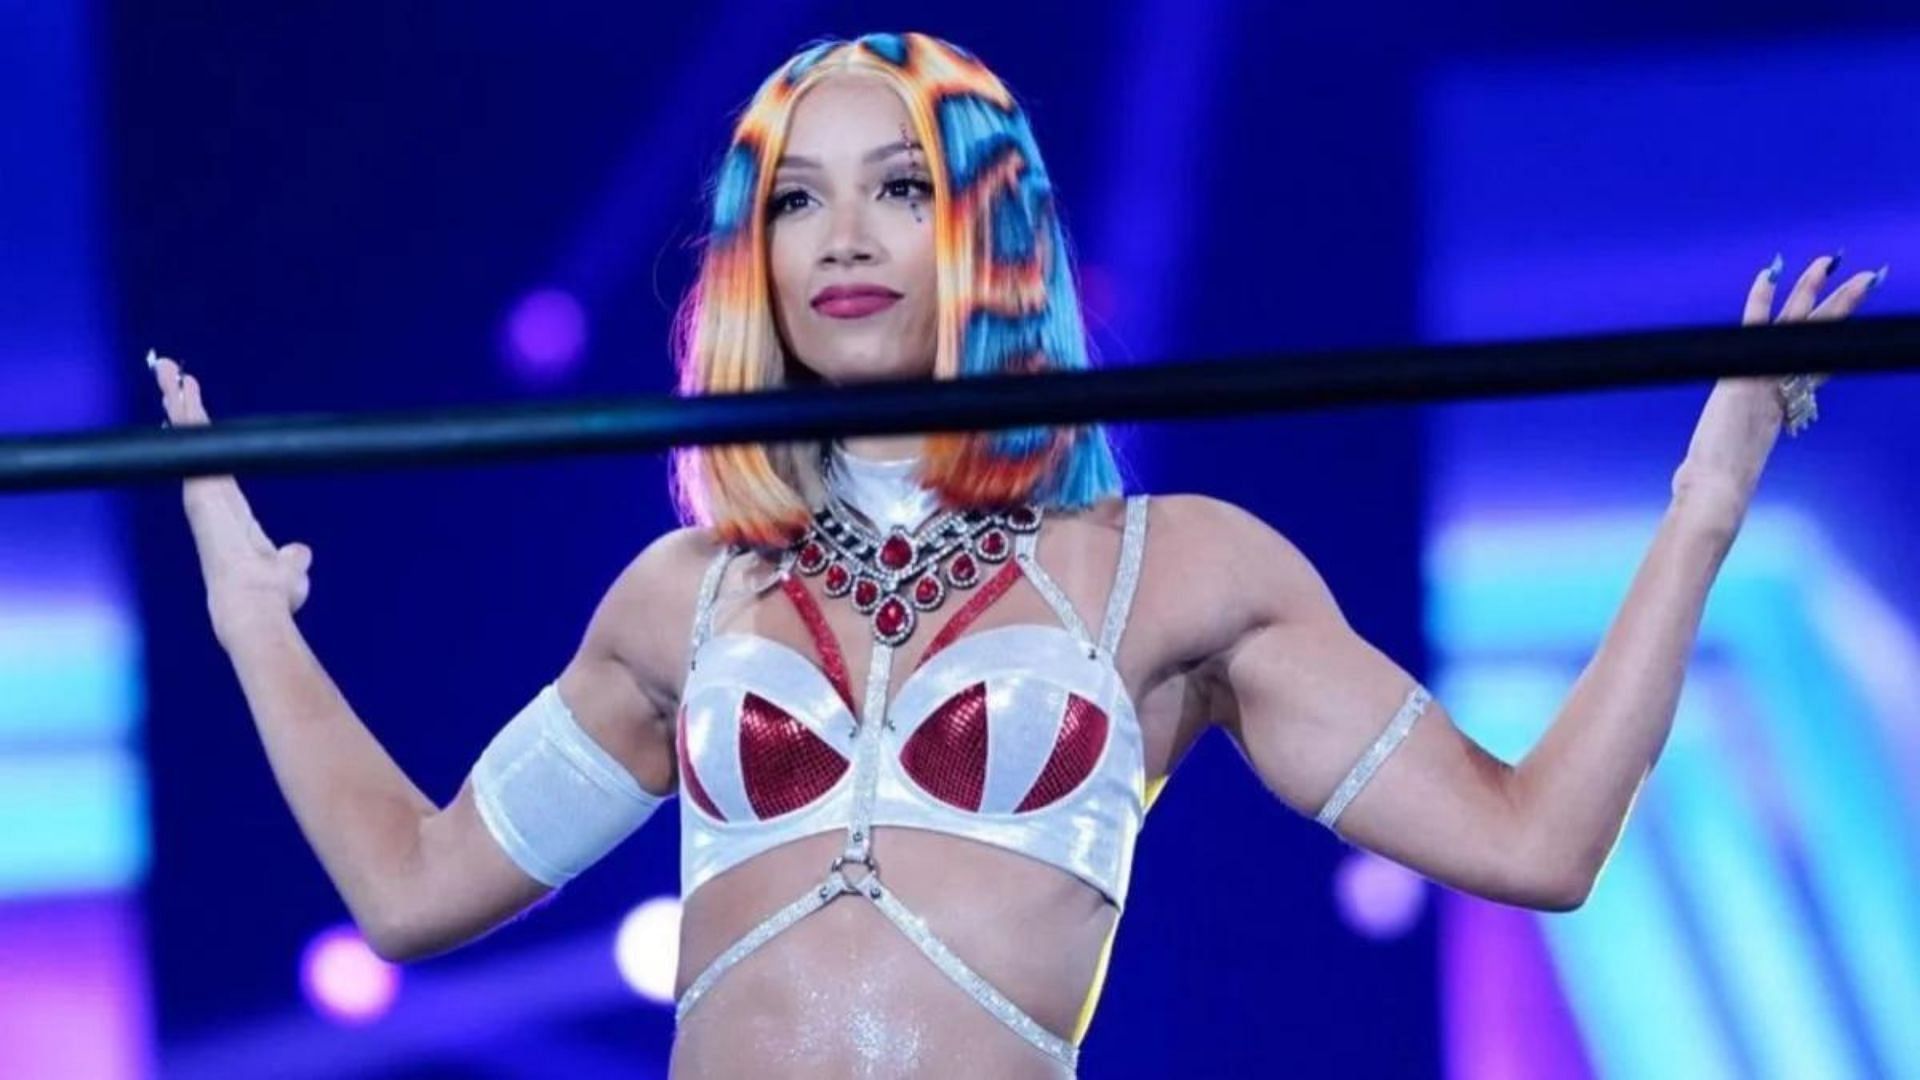 Mercedes Mone appeared at Wrestle Kingdom 17